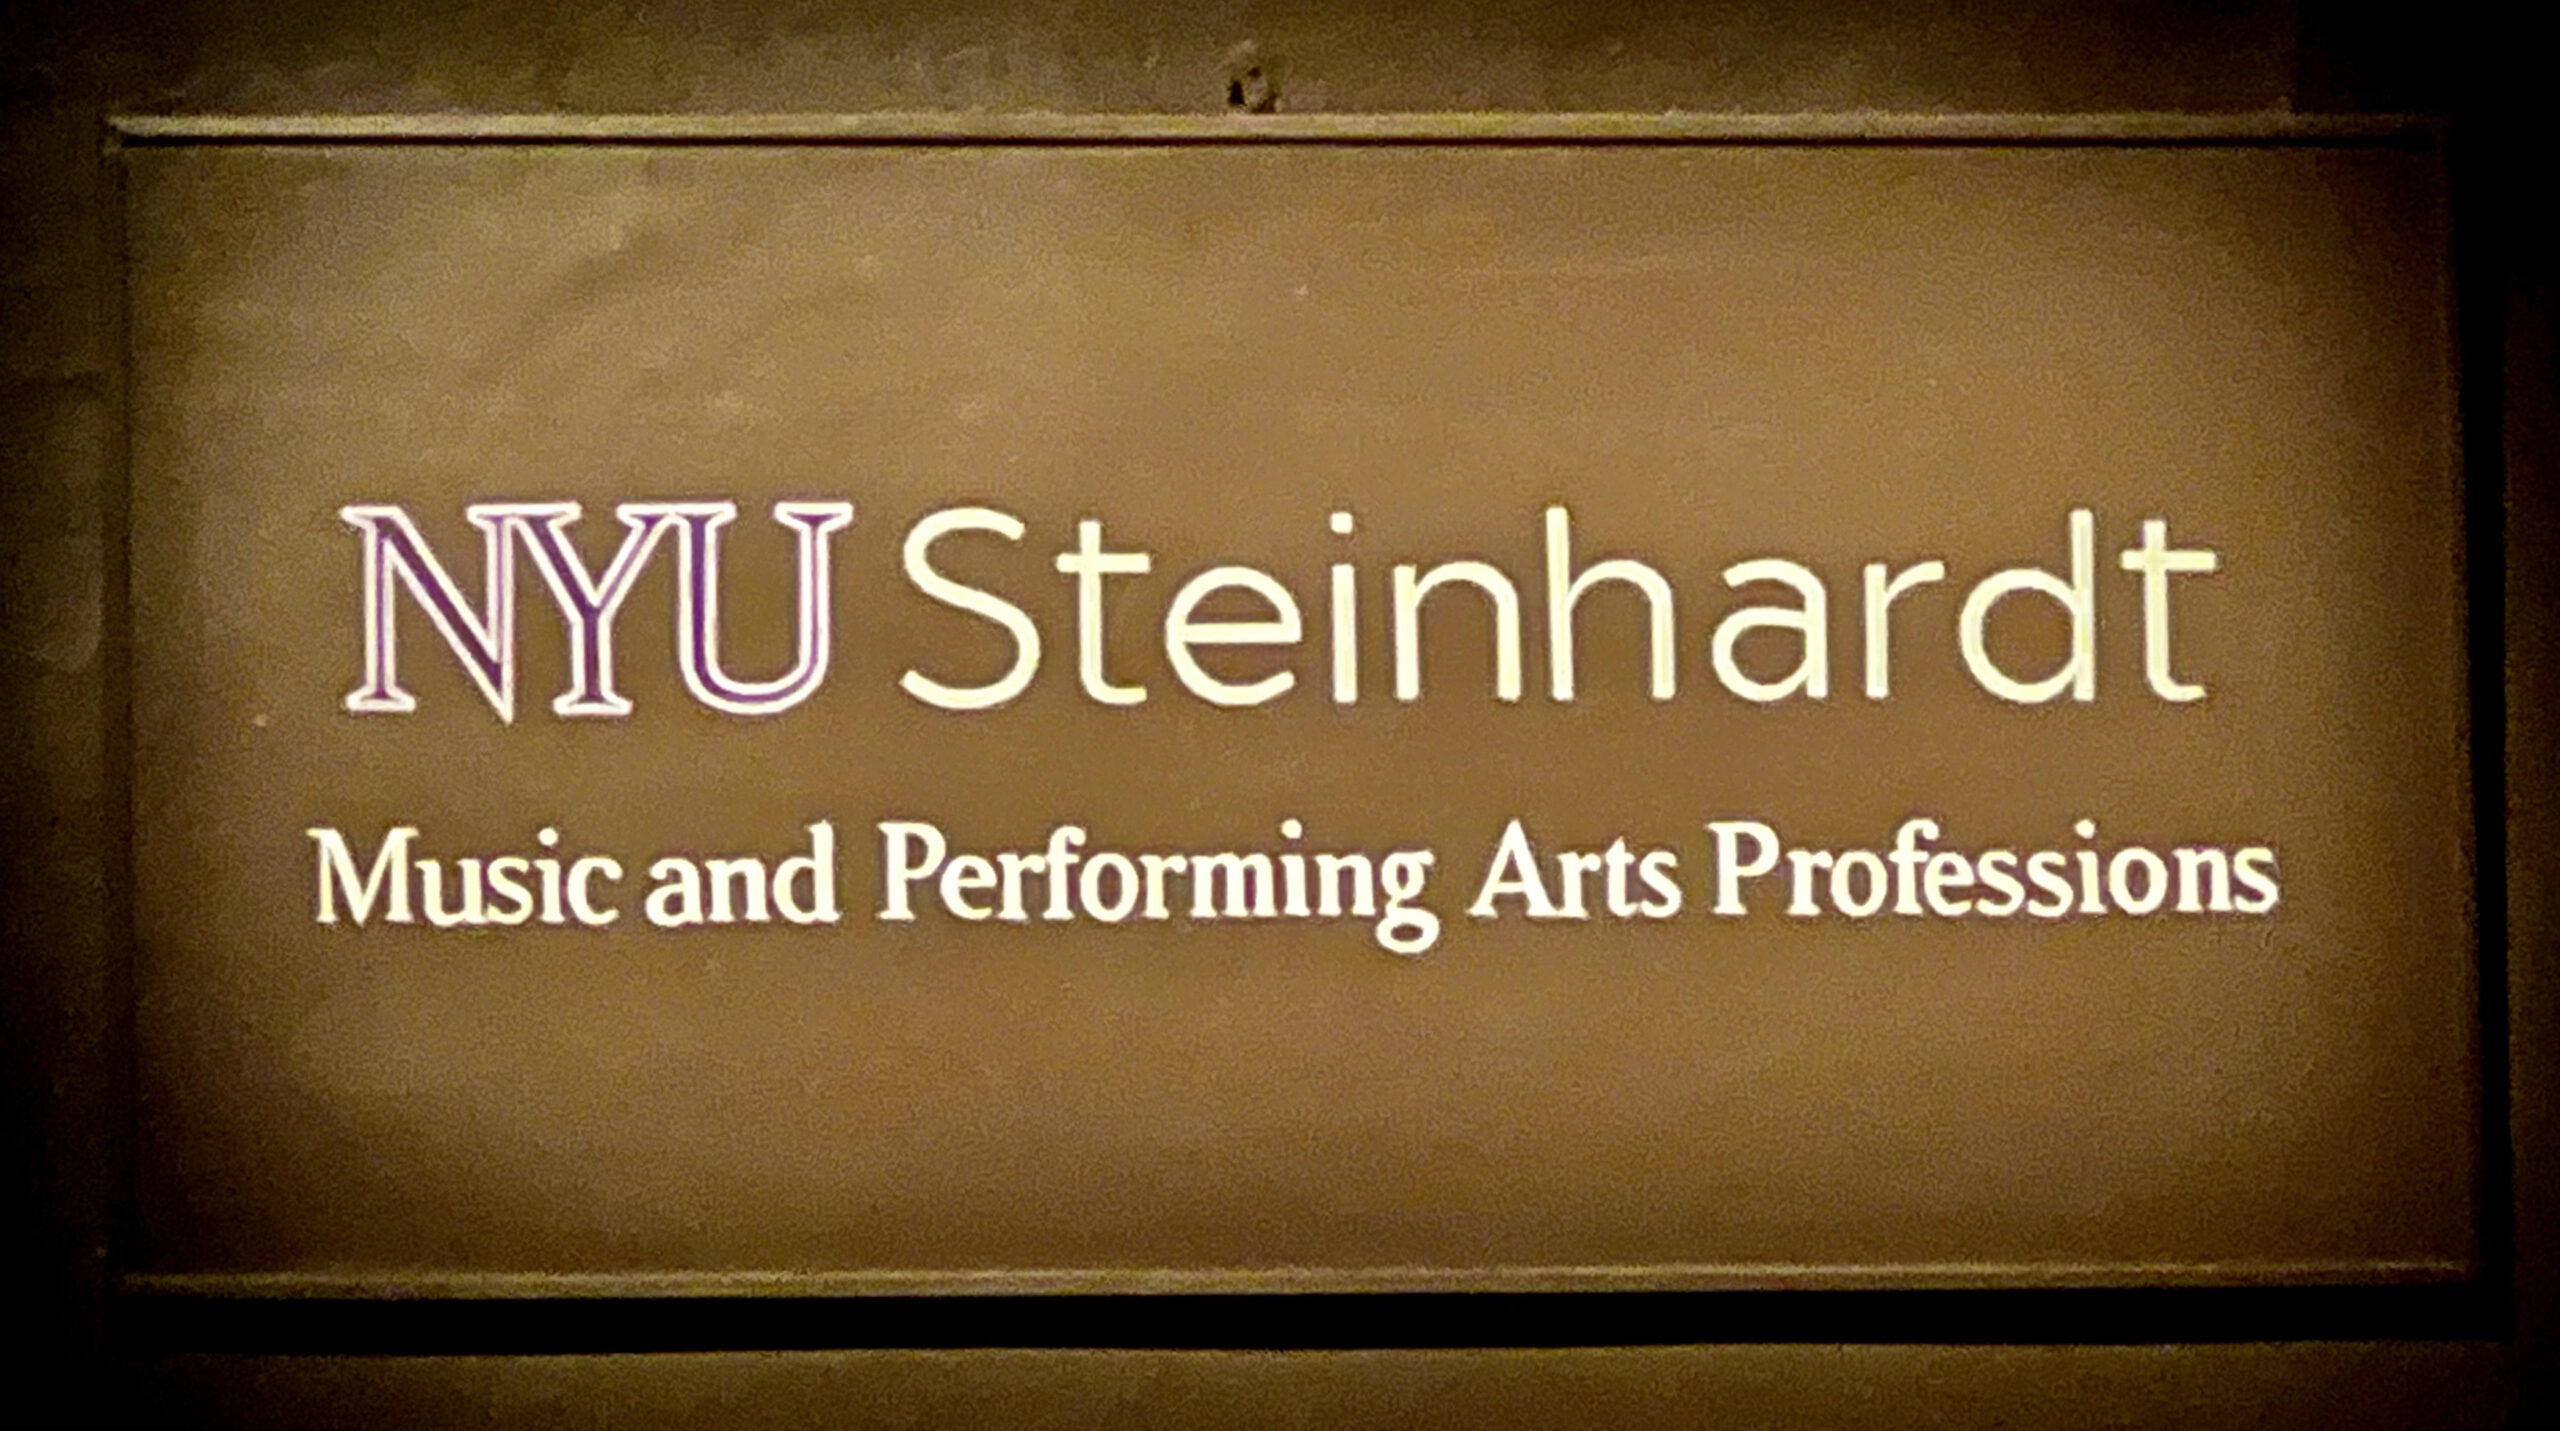 Image of NYU Steinhardt logo and Music and Performing Arts Professions underneath the header text.